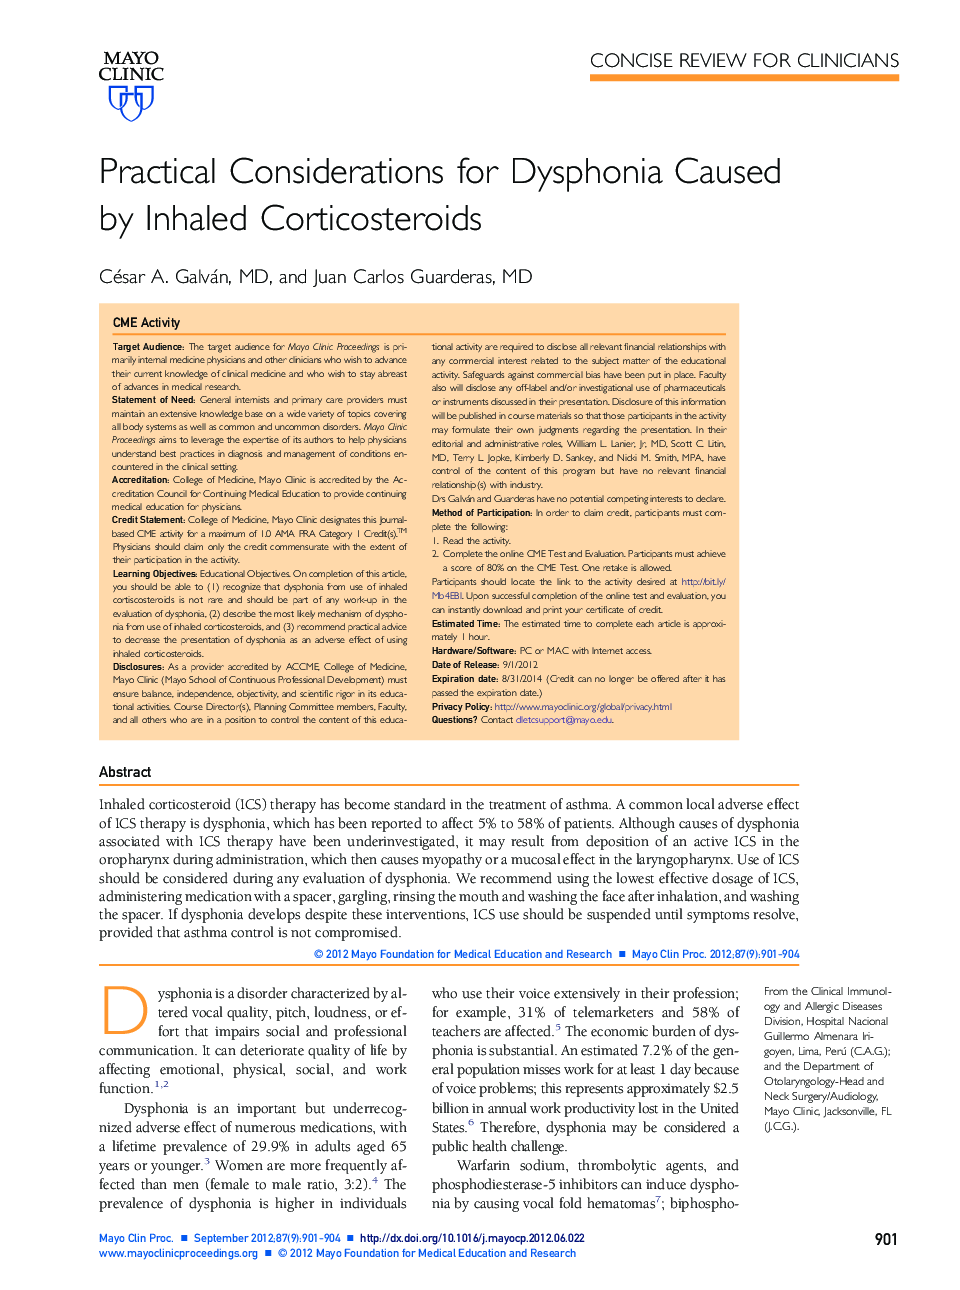 Practical Considerations for Dysphonia Caused by Inhaled Corticosteroids